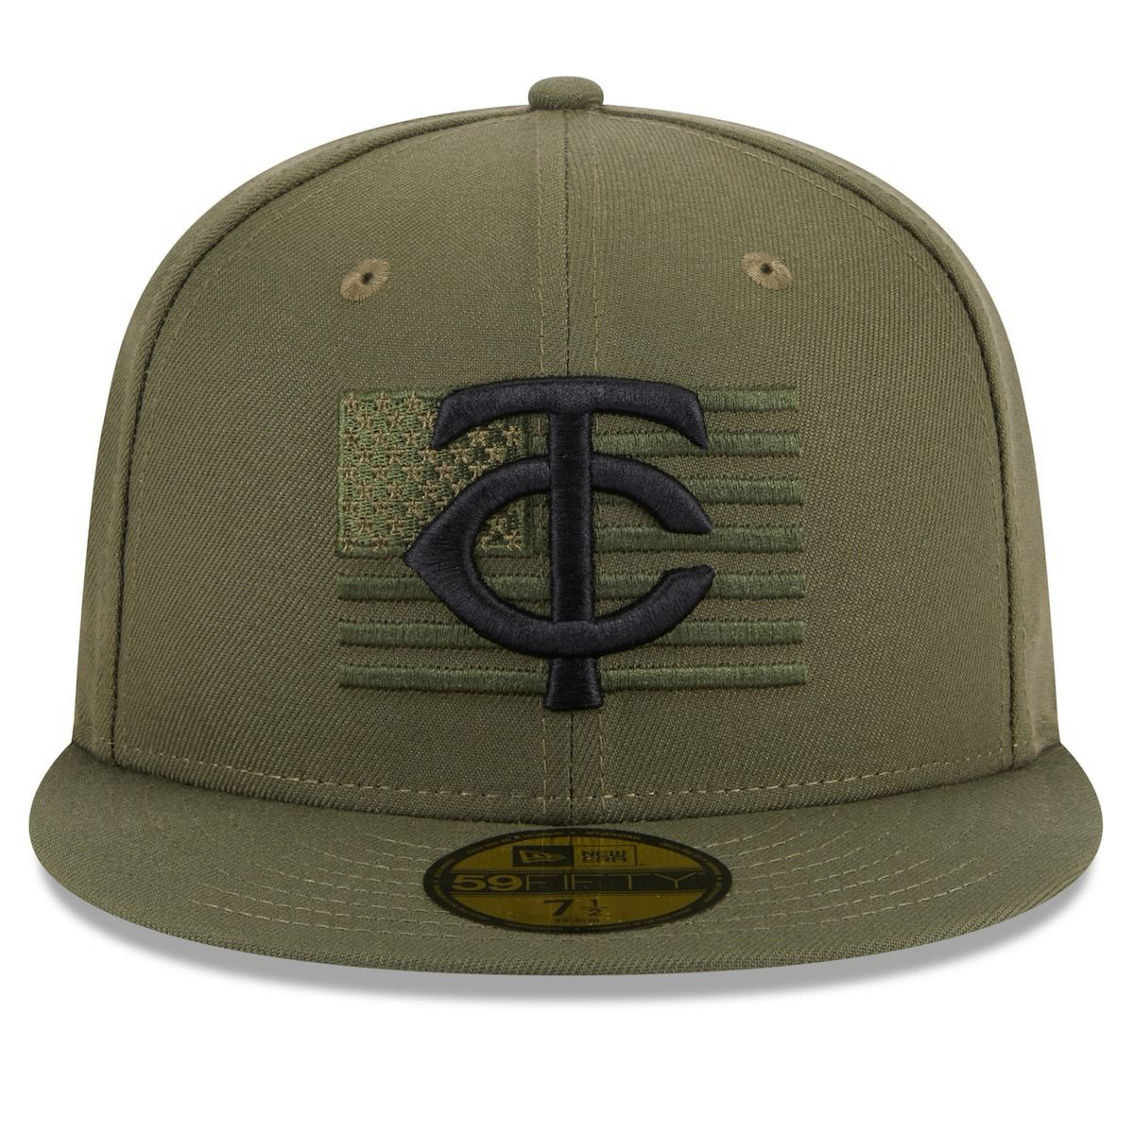 New Era Men's Green Minnesota Twins 2023 Armed Forces Day On-Field 59FIFTY Fitted Hat - Image 3 of 4